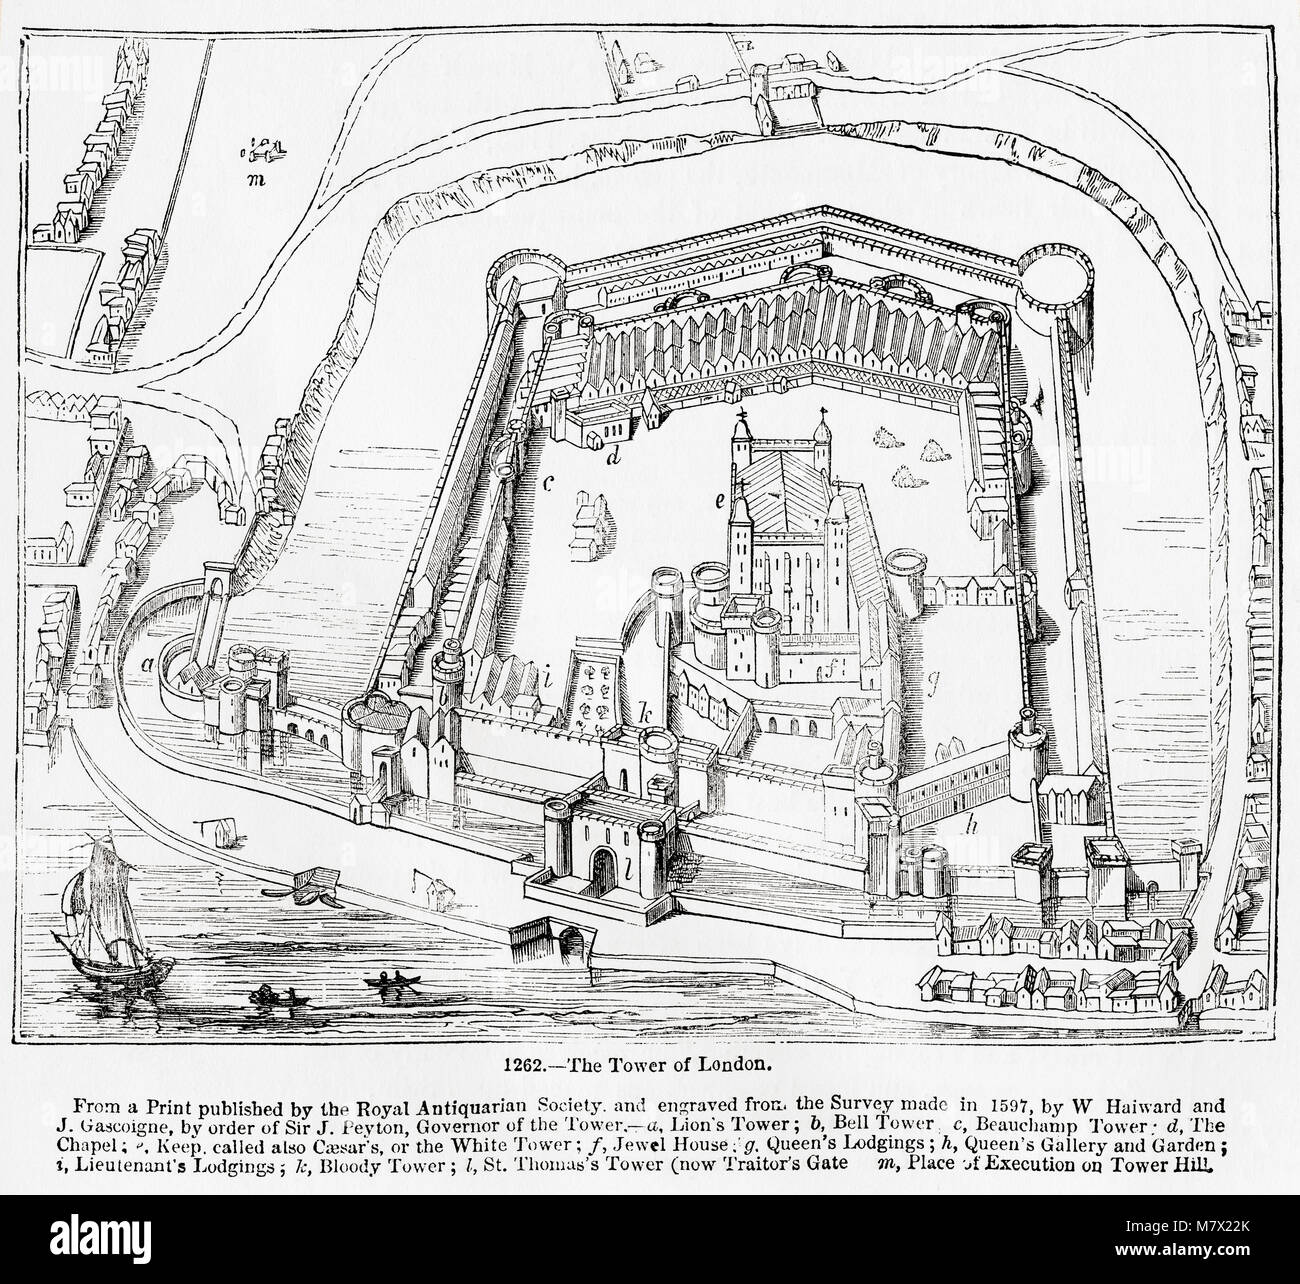 The Tower of London.  From a print published by The Royal Antiquarian Society and engraved from the survey made in 1597, by W. Haiward and J. Gascoigne, by order of Sir J. Peyton, Governor of The Tower - a, Lion's Tower   b, Bell Tower   c, Beauchamp Tower   d, The Chapel   e, Keep called also Caesar's or The White Tower   f, Jewel House   g, Queen's Lodgings,   h, Queen's Gallery and Garden   i, Lieutenant's Lodgings   k, Bloody Tower   l, St, Thomas's Tower (now Traitor's Gate)   m, Place of Execution on Tower Hill.  From Old England: A Pictorial Museum, published 1847. Stock Photo